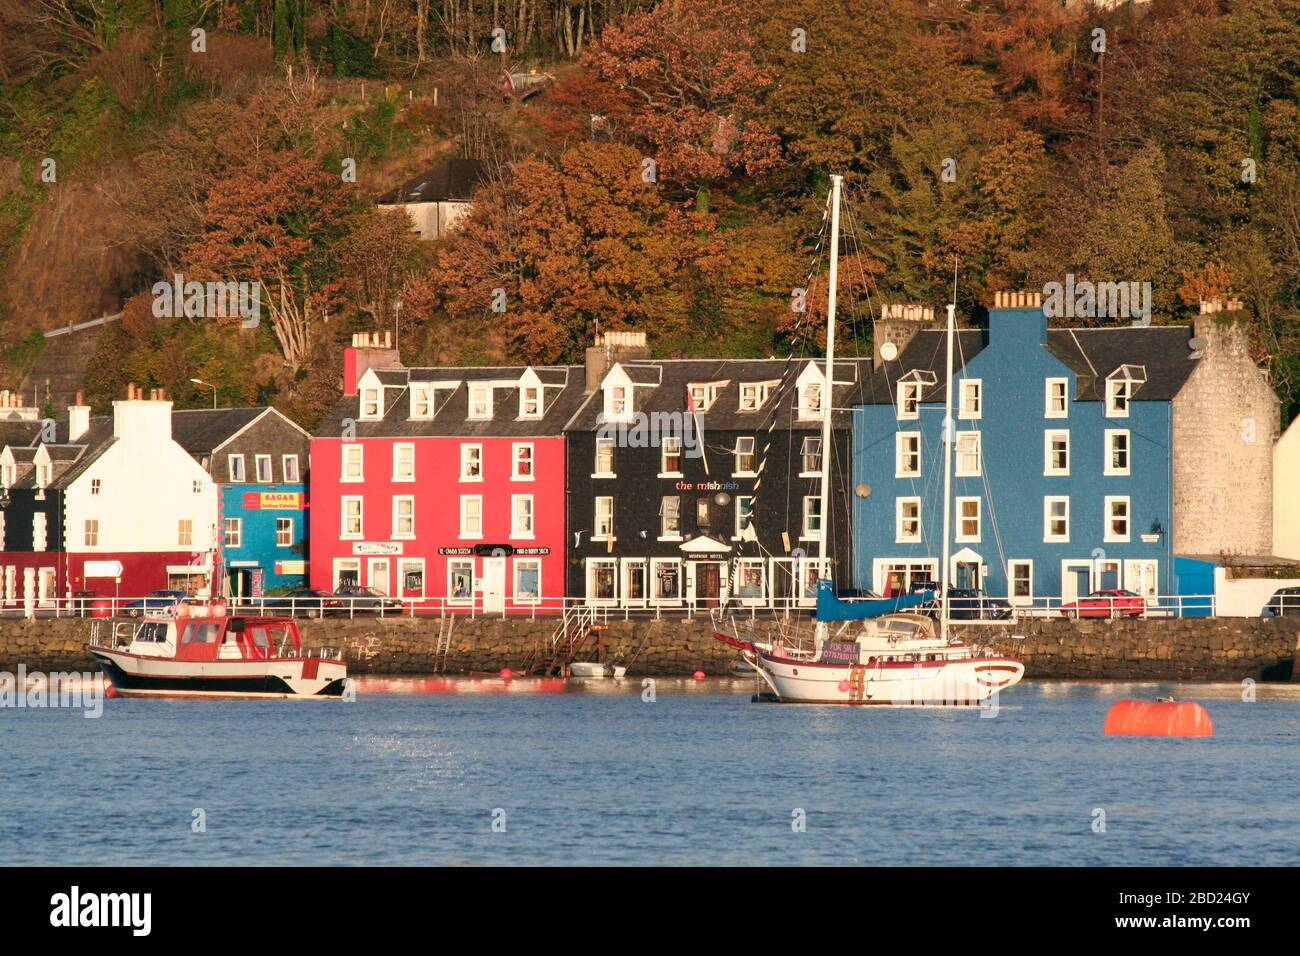 Colourful buildings and boats on moorings, Tobermory harbour, Isle of Mull, Argyll, Scotland Stock Photo